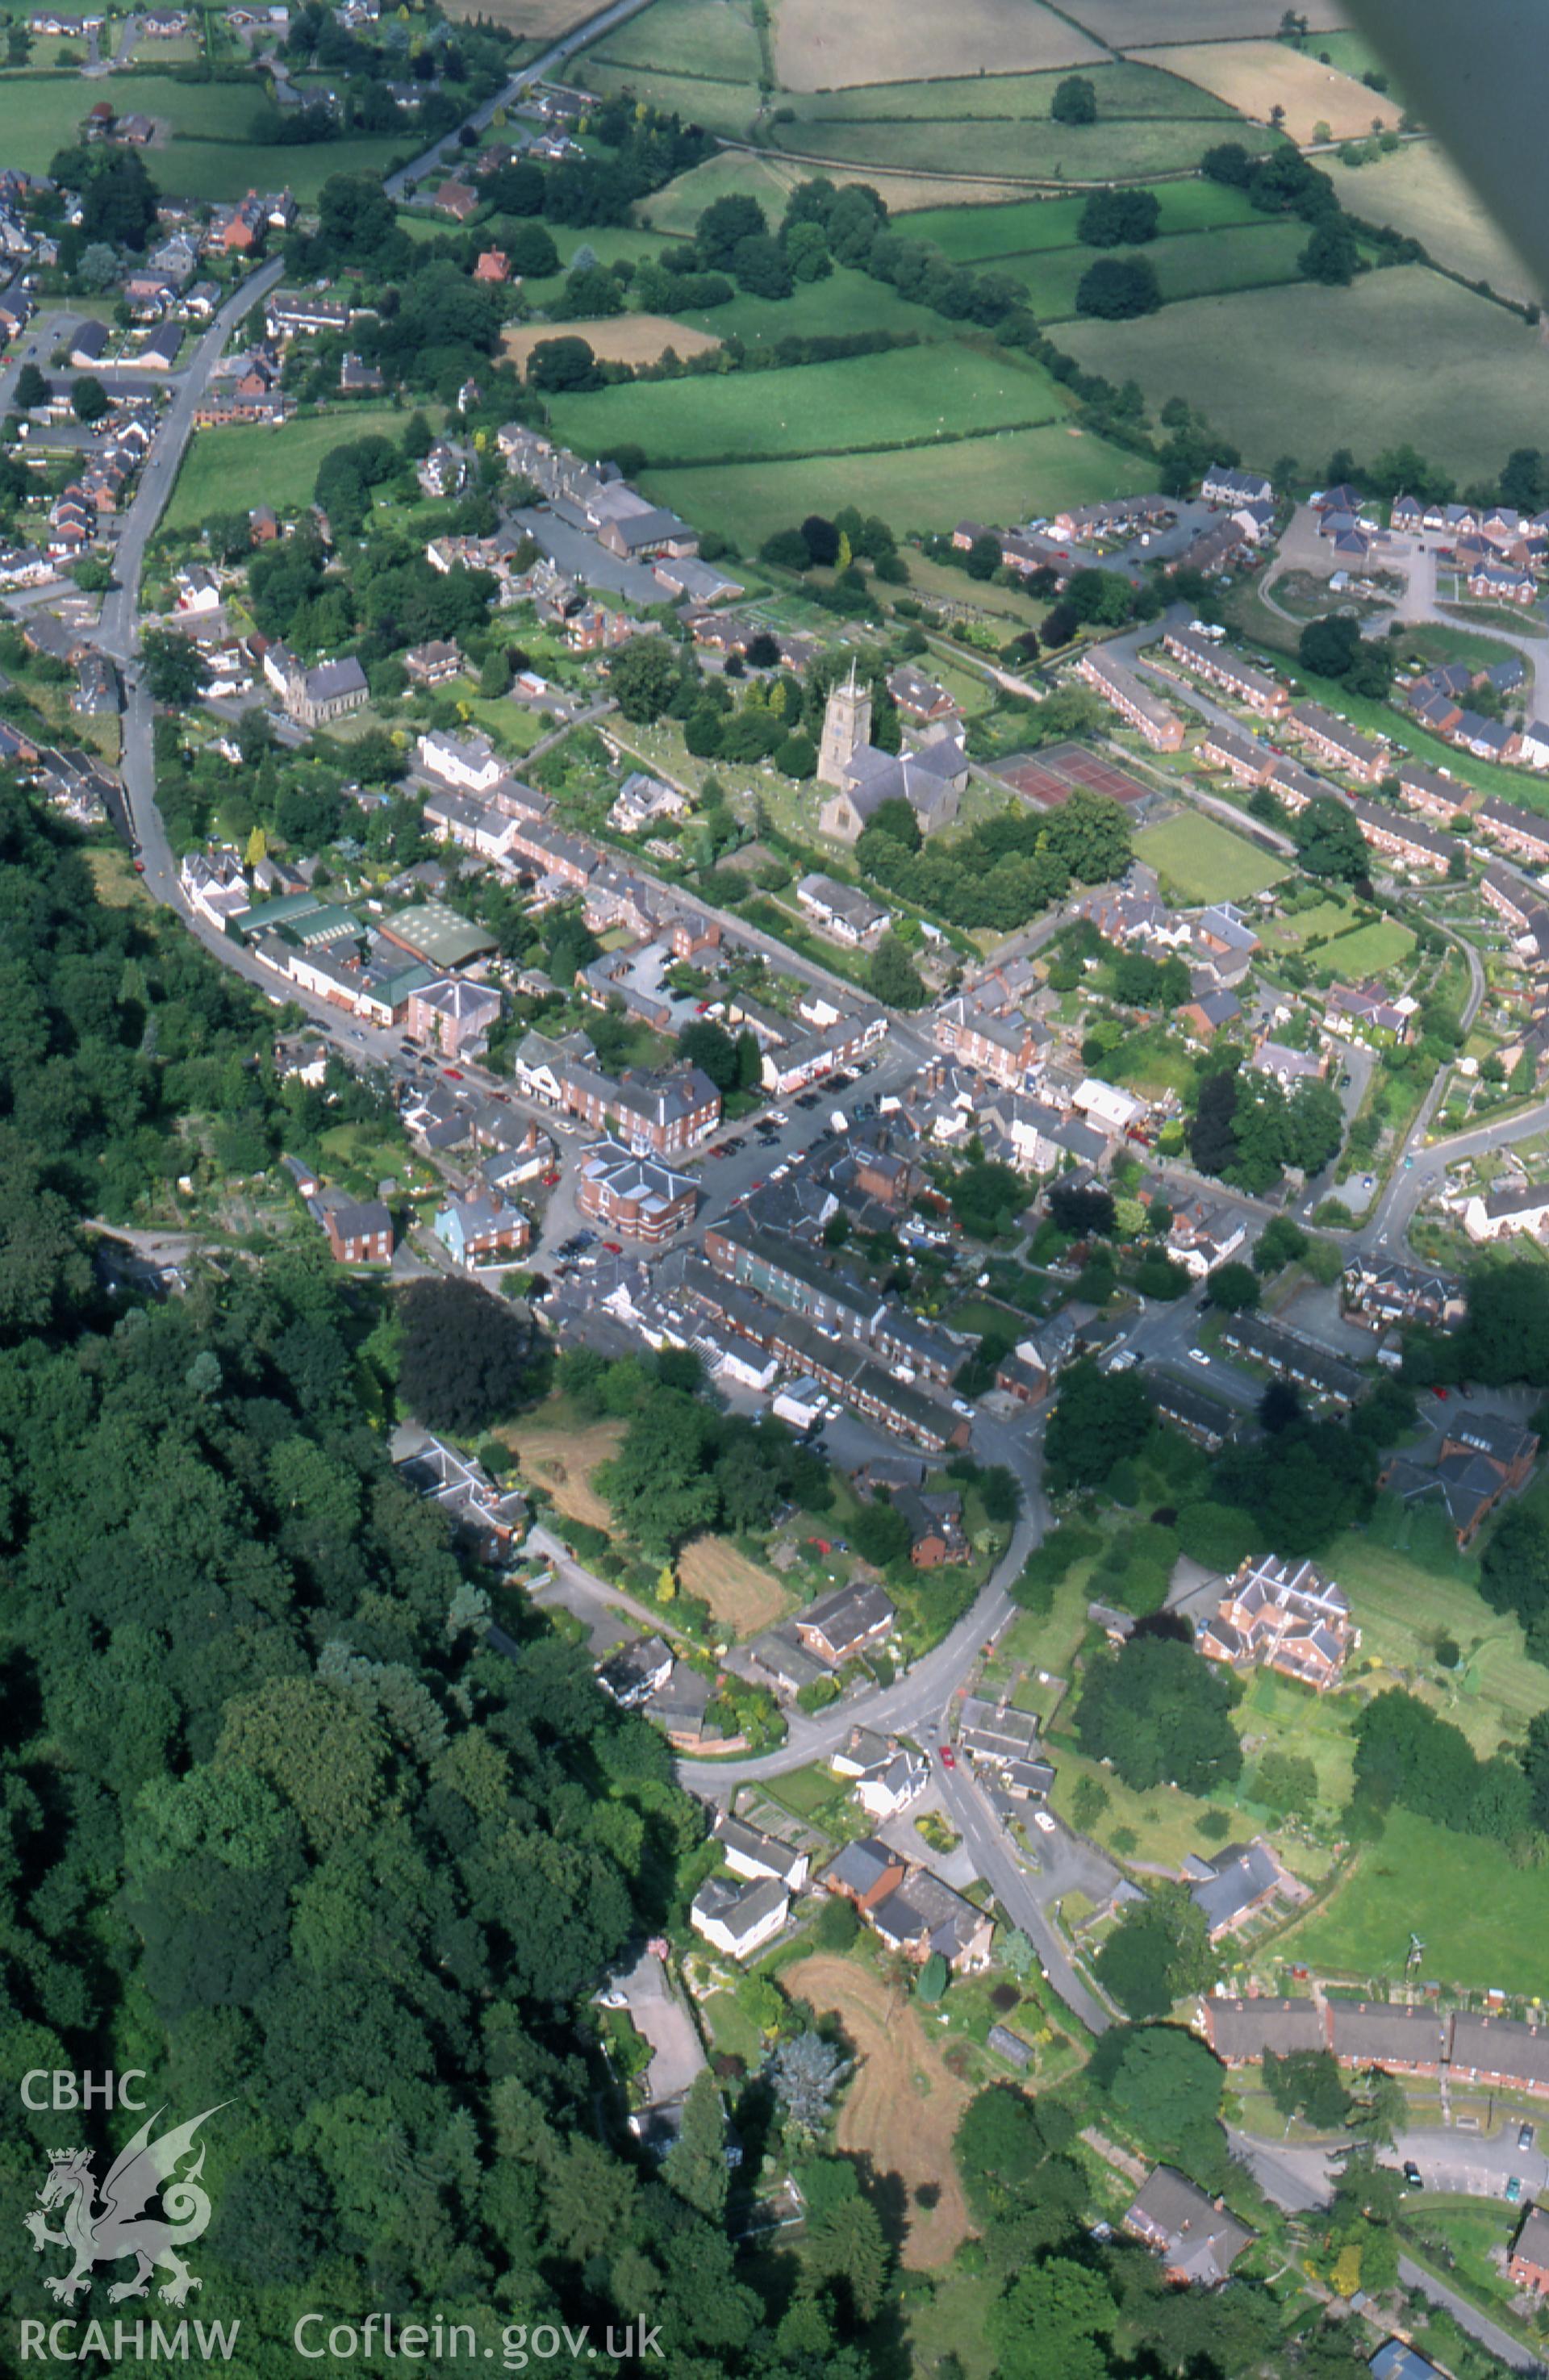 Slide of RCAHMW colour oblique aerial photograph of Montgomery, taken by T.G. Driver, 20/7/2000.